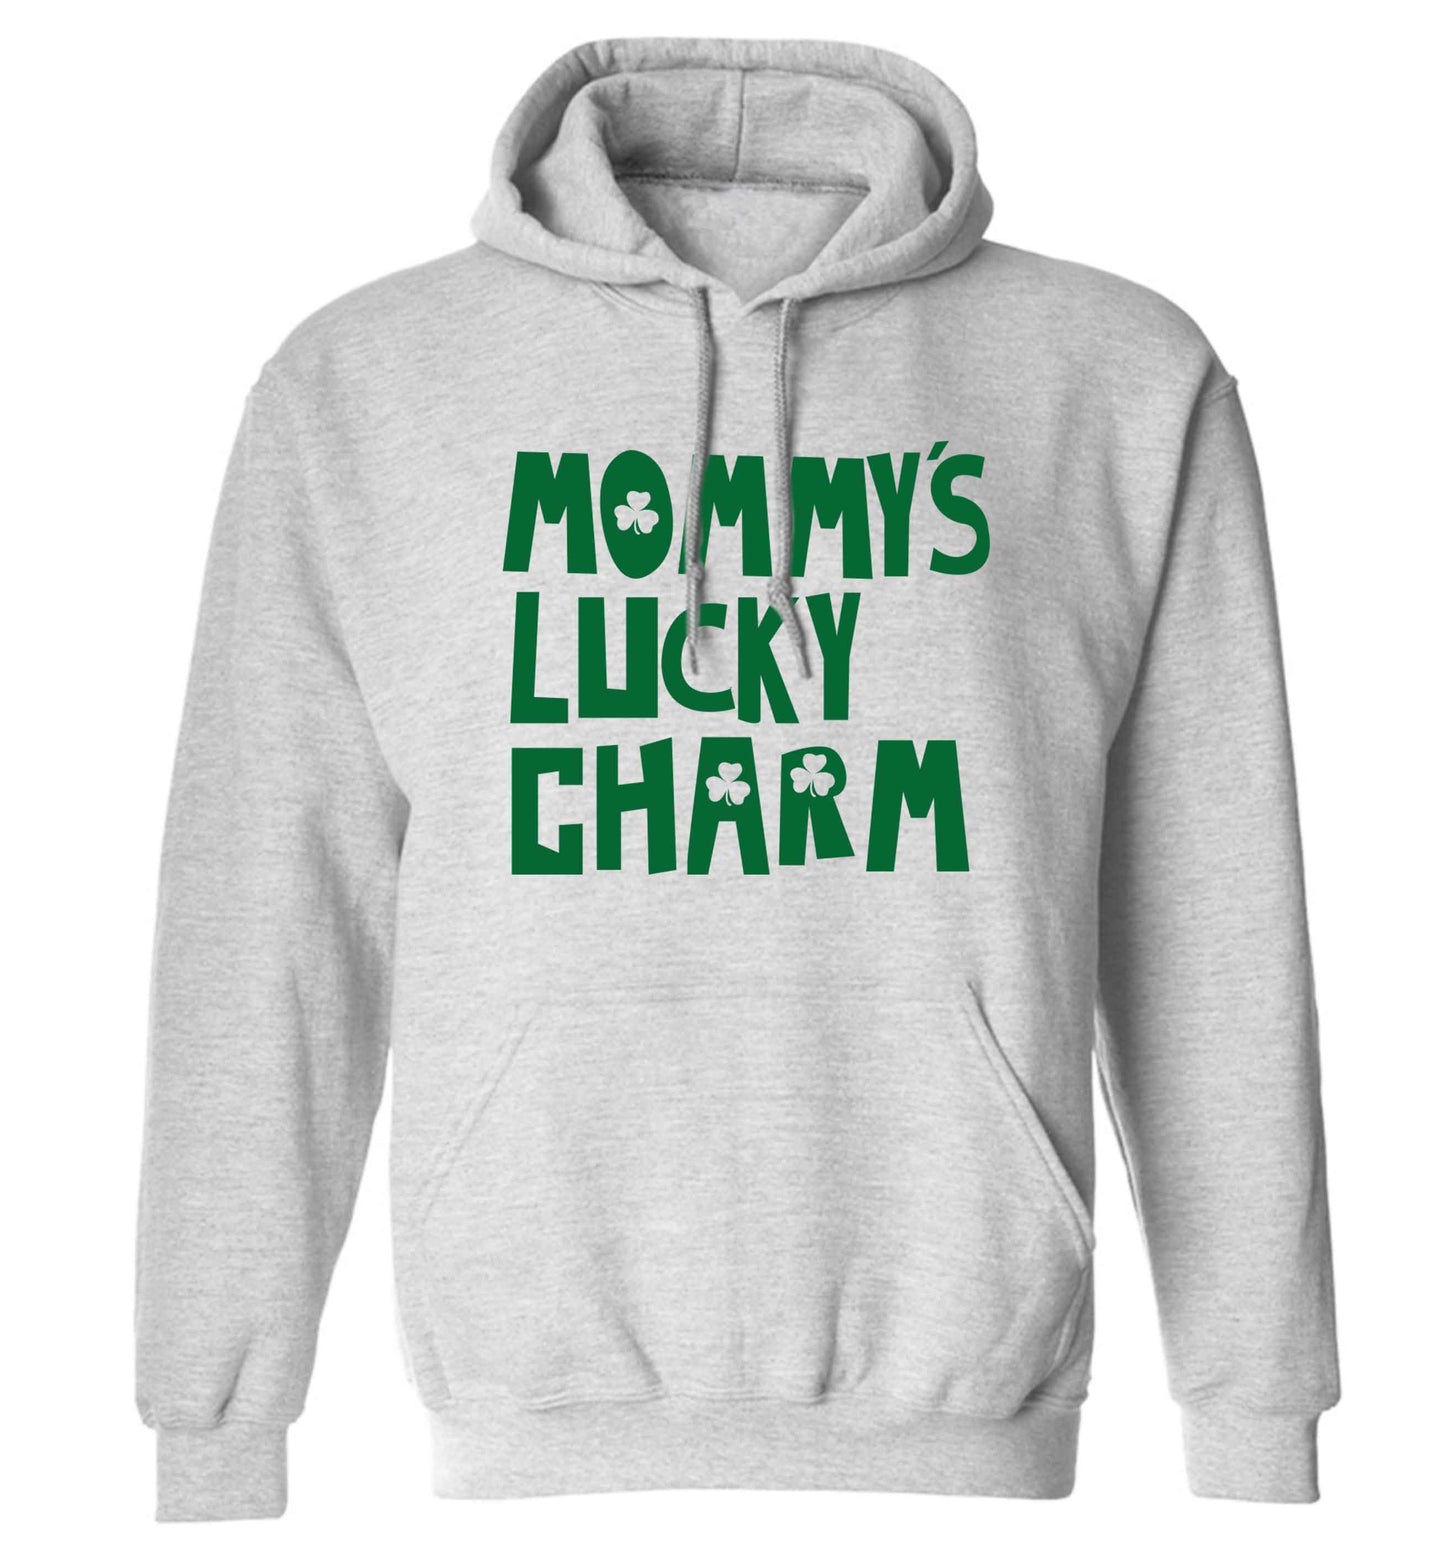 Mommy's lucky charm adults unisex grey hoodie 2XL